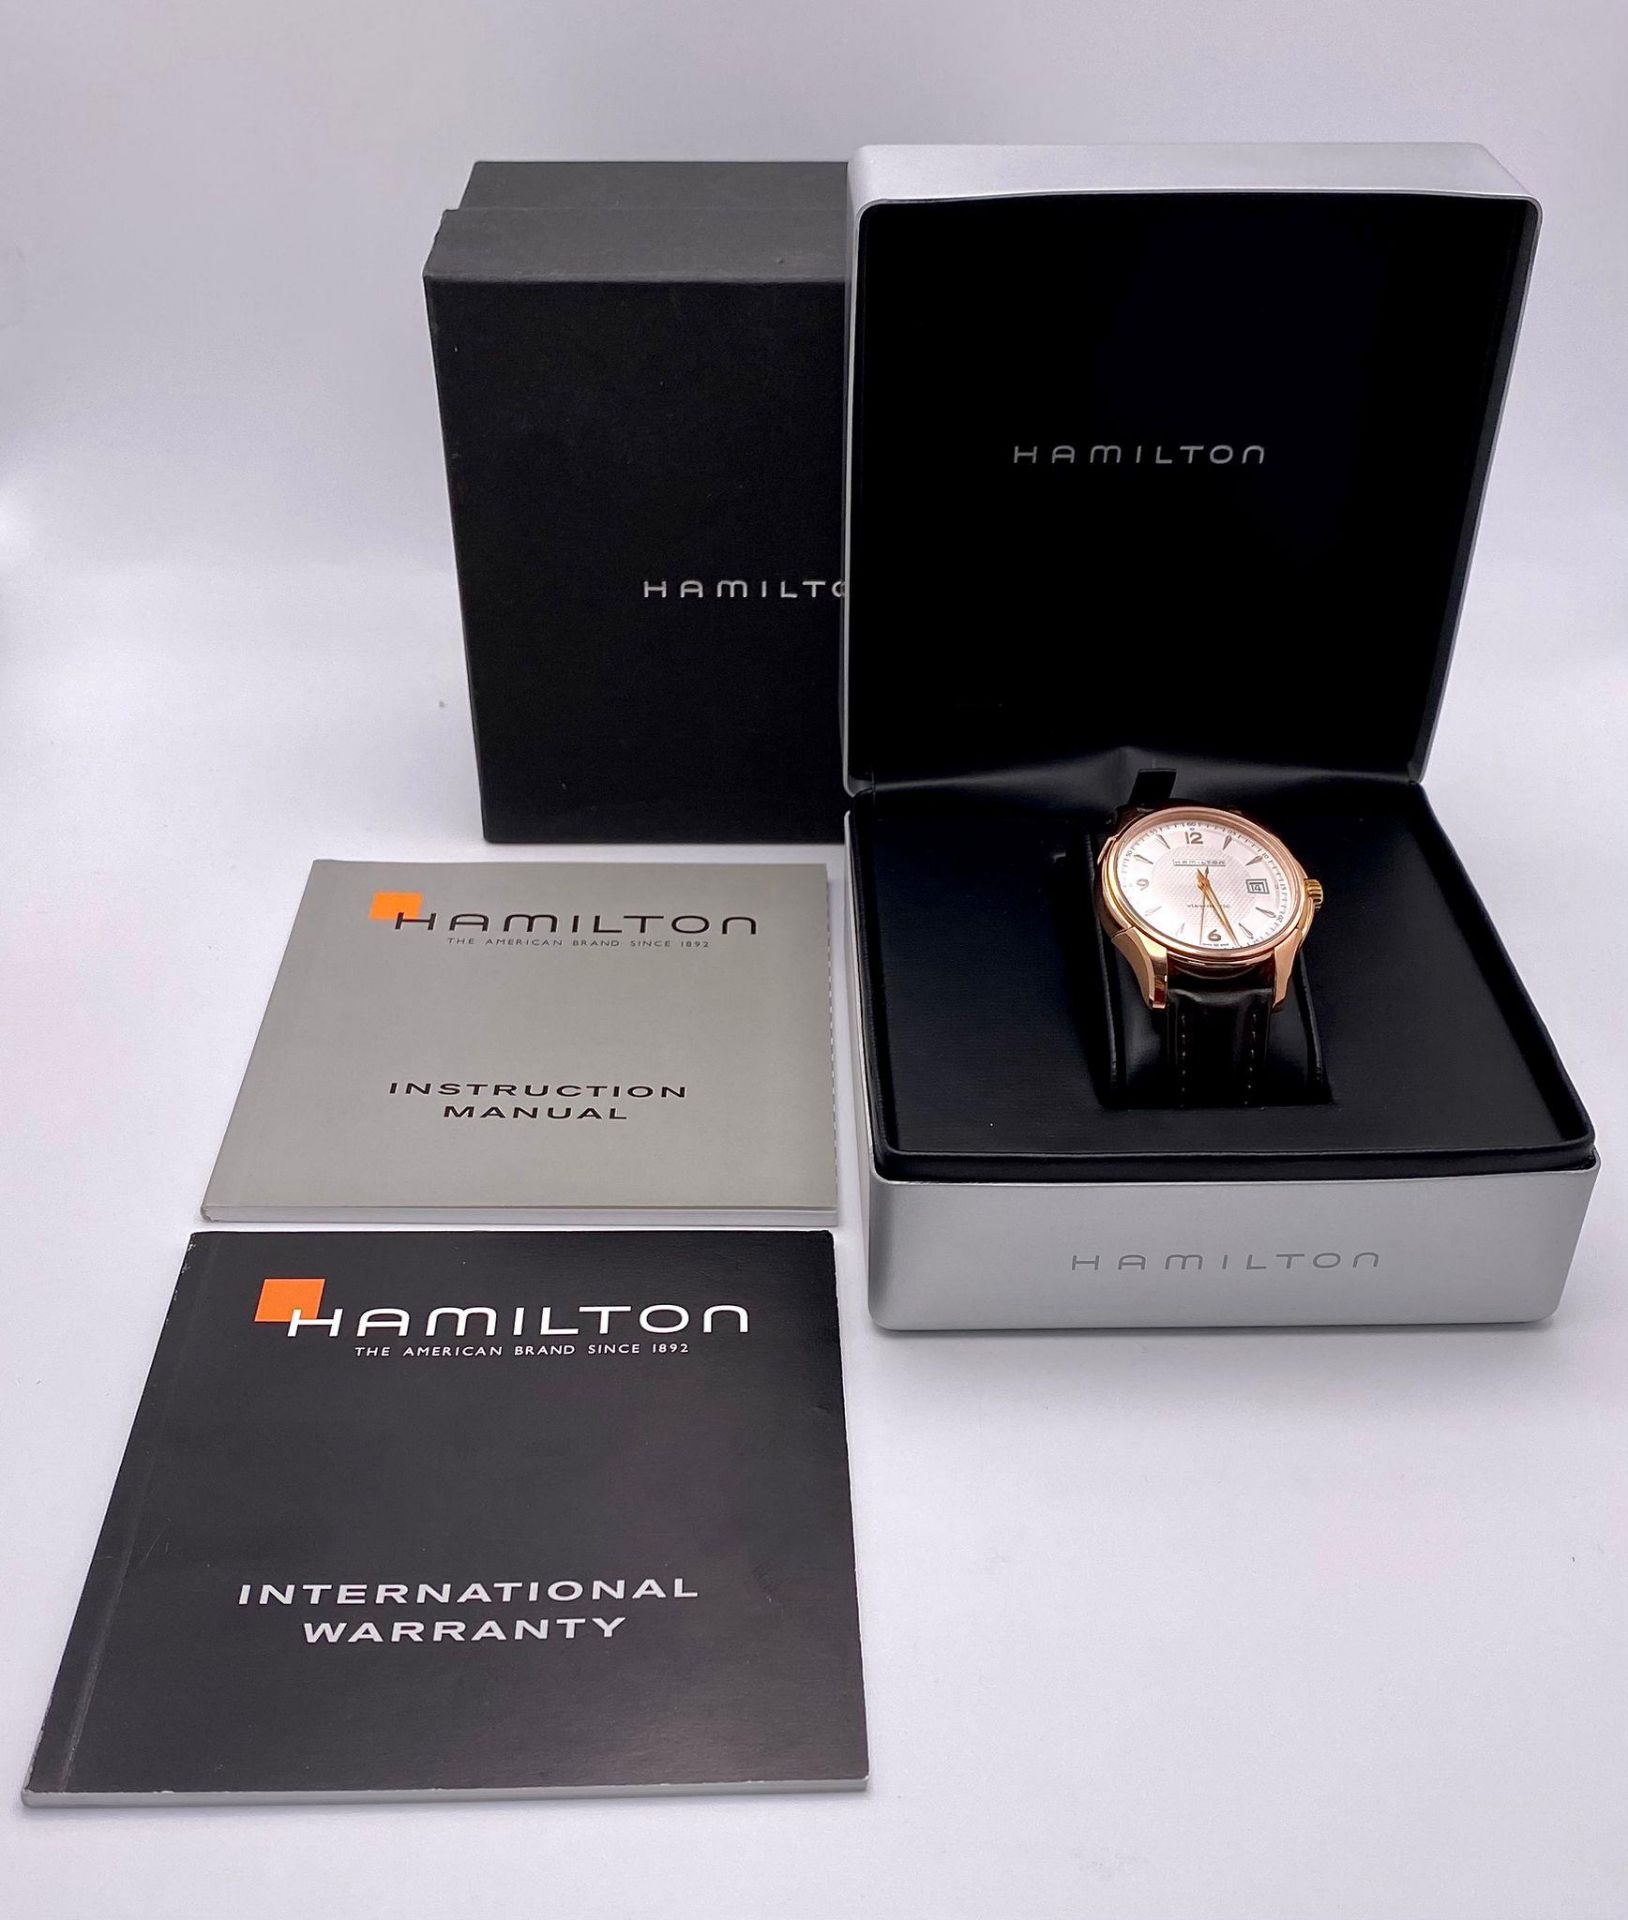 An Excellent Condition Hamilton Viewmatic Jazzmaster Rose Gold Plated Automatic Date Watch Model - Image 9 of 9